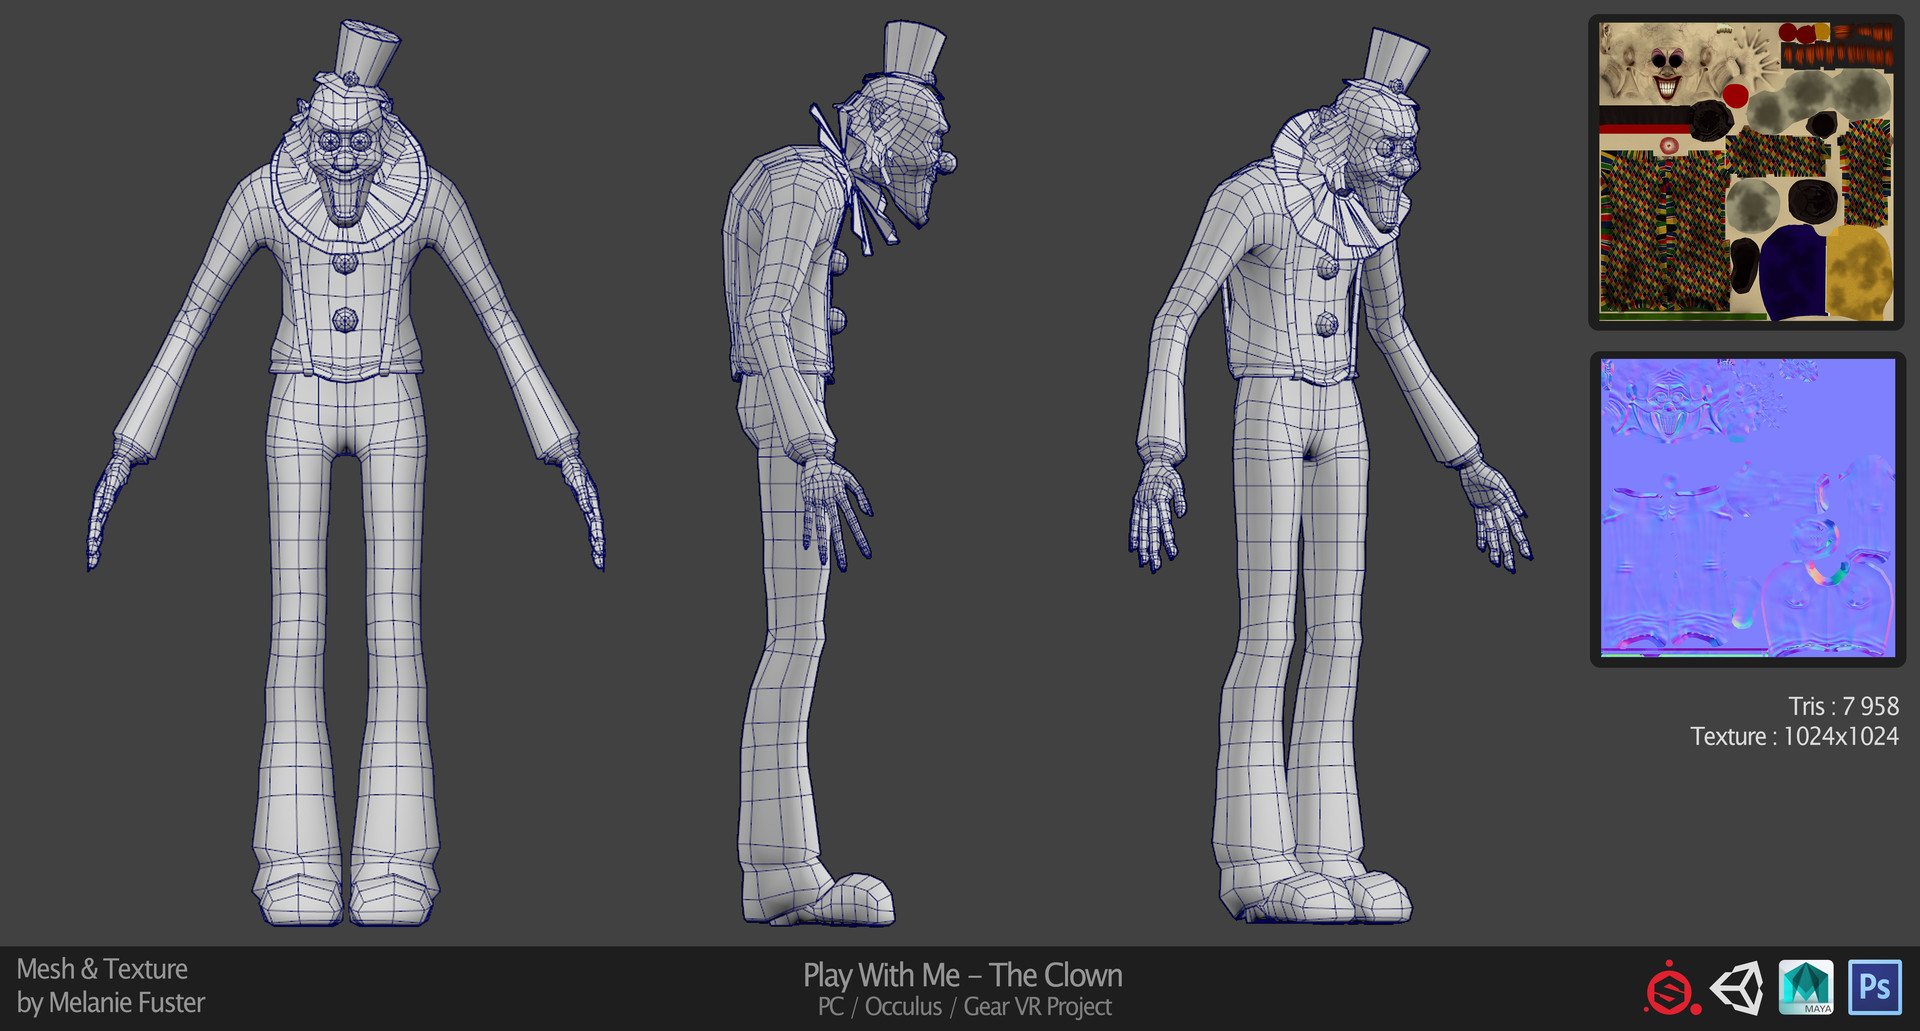 ArtStation - Play with me - the Clown, Mélanie Fuster